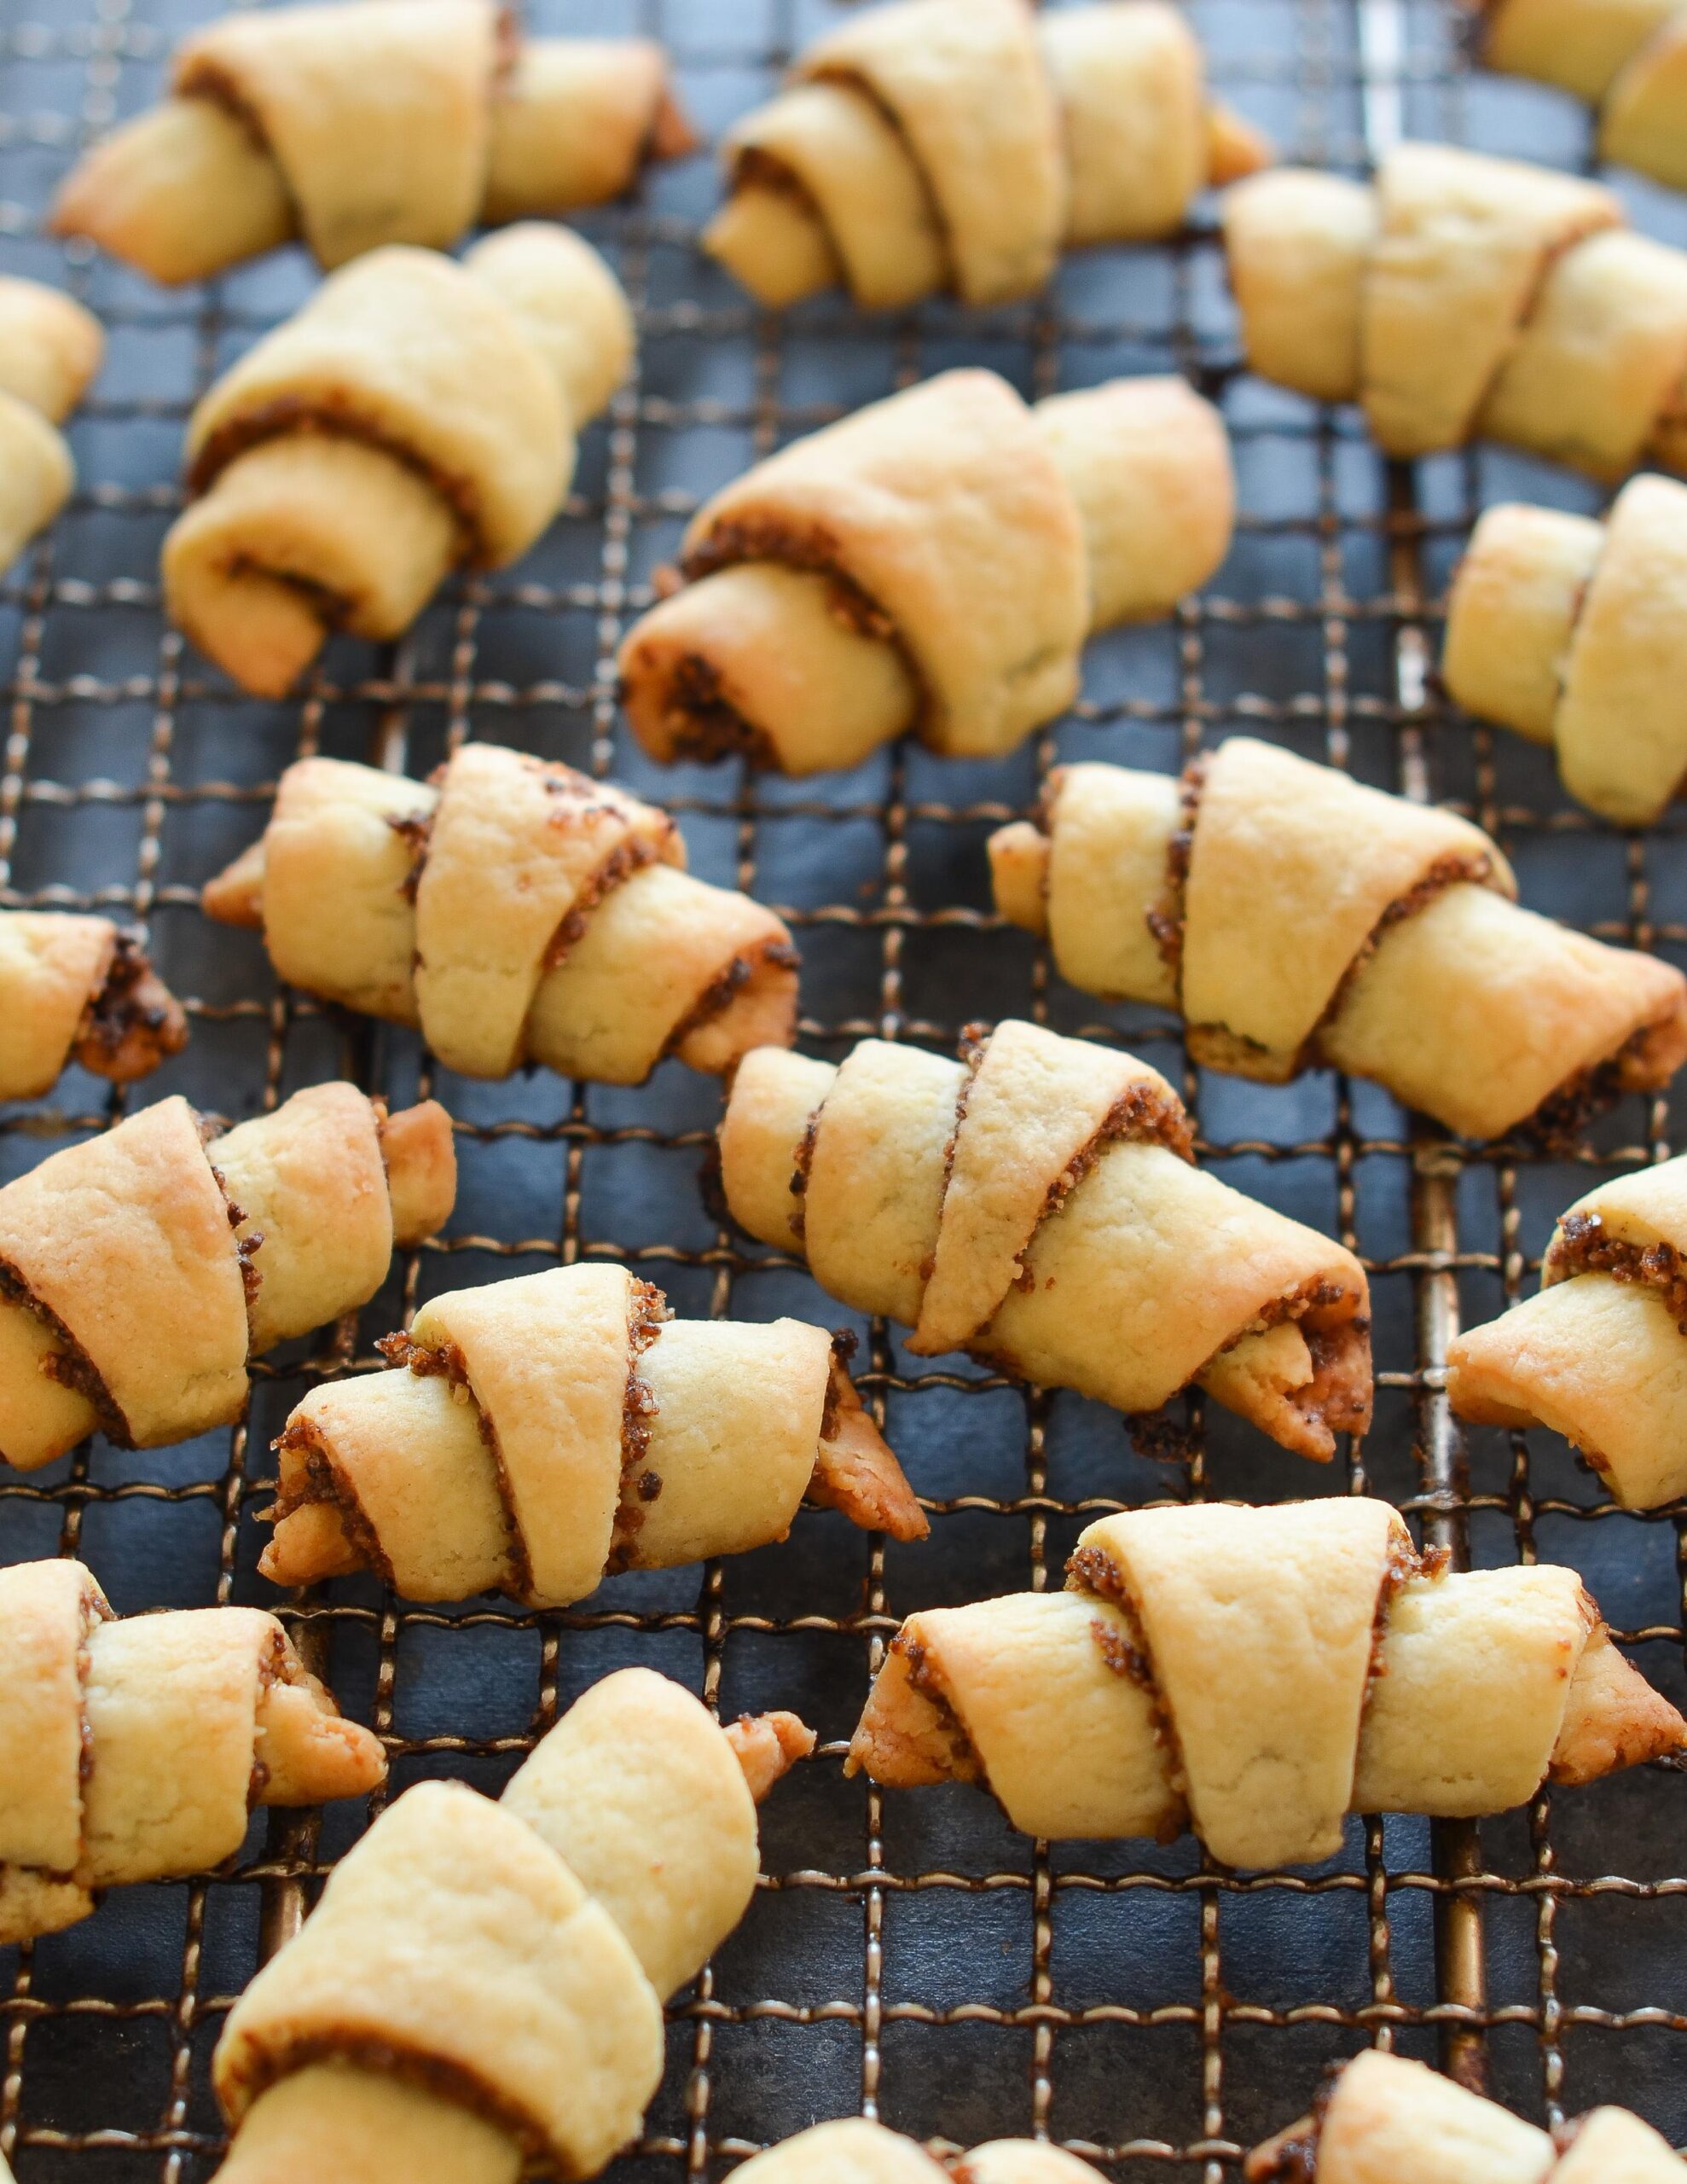  Sink your teeth into these flaky, creamy, and nutty crescent-shaped cookies!